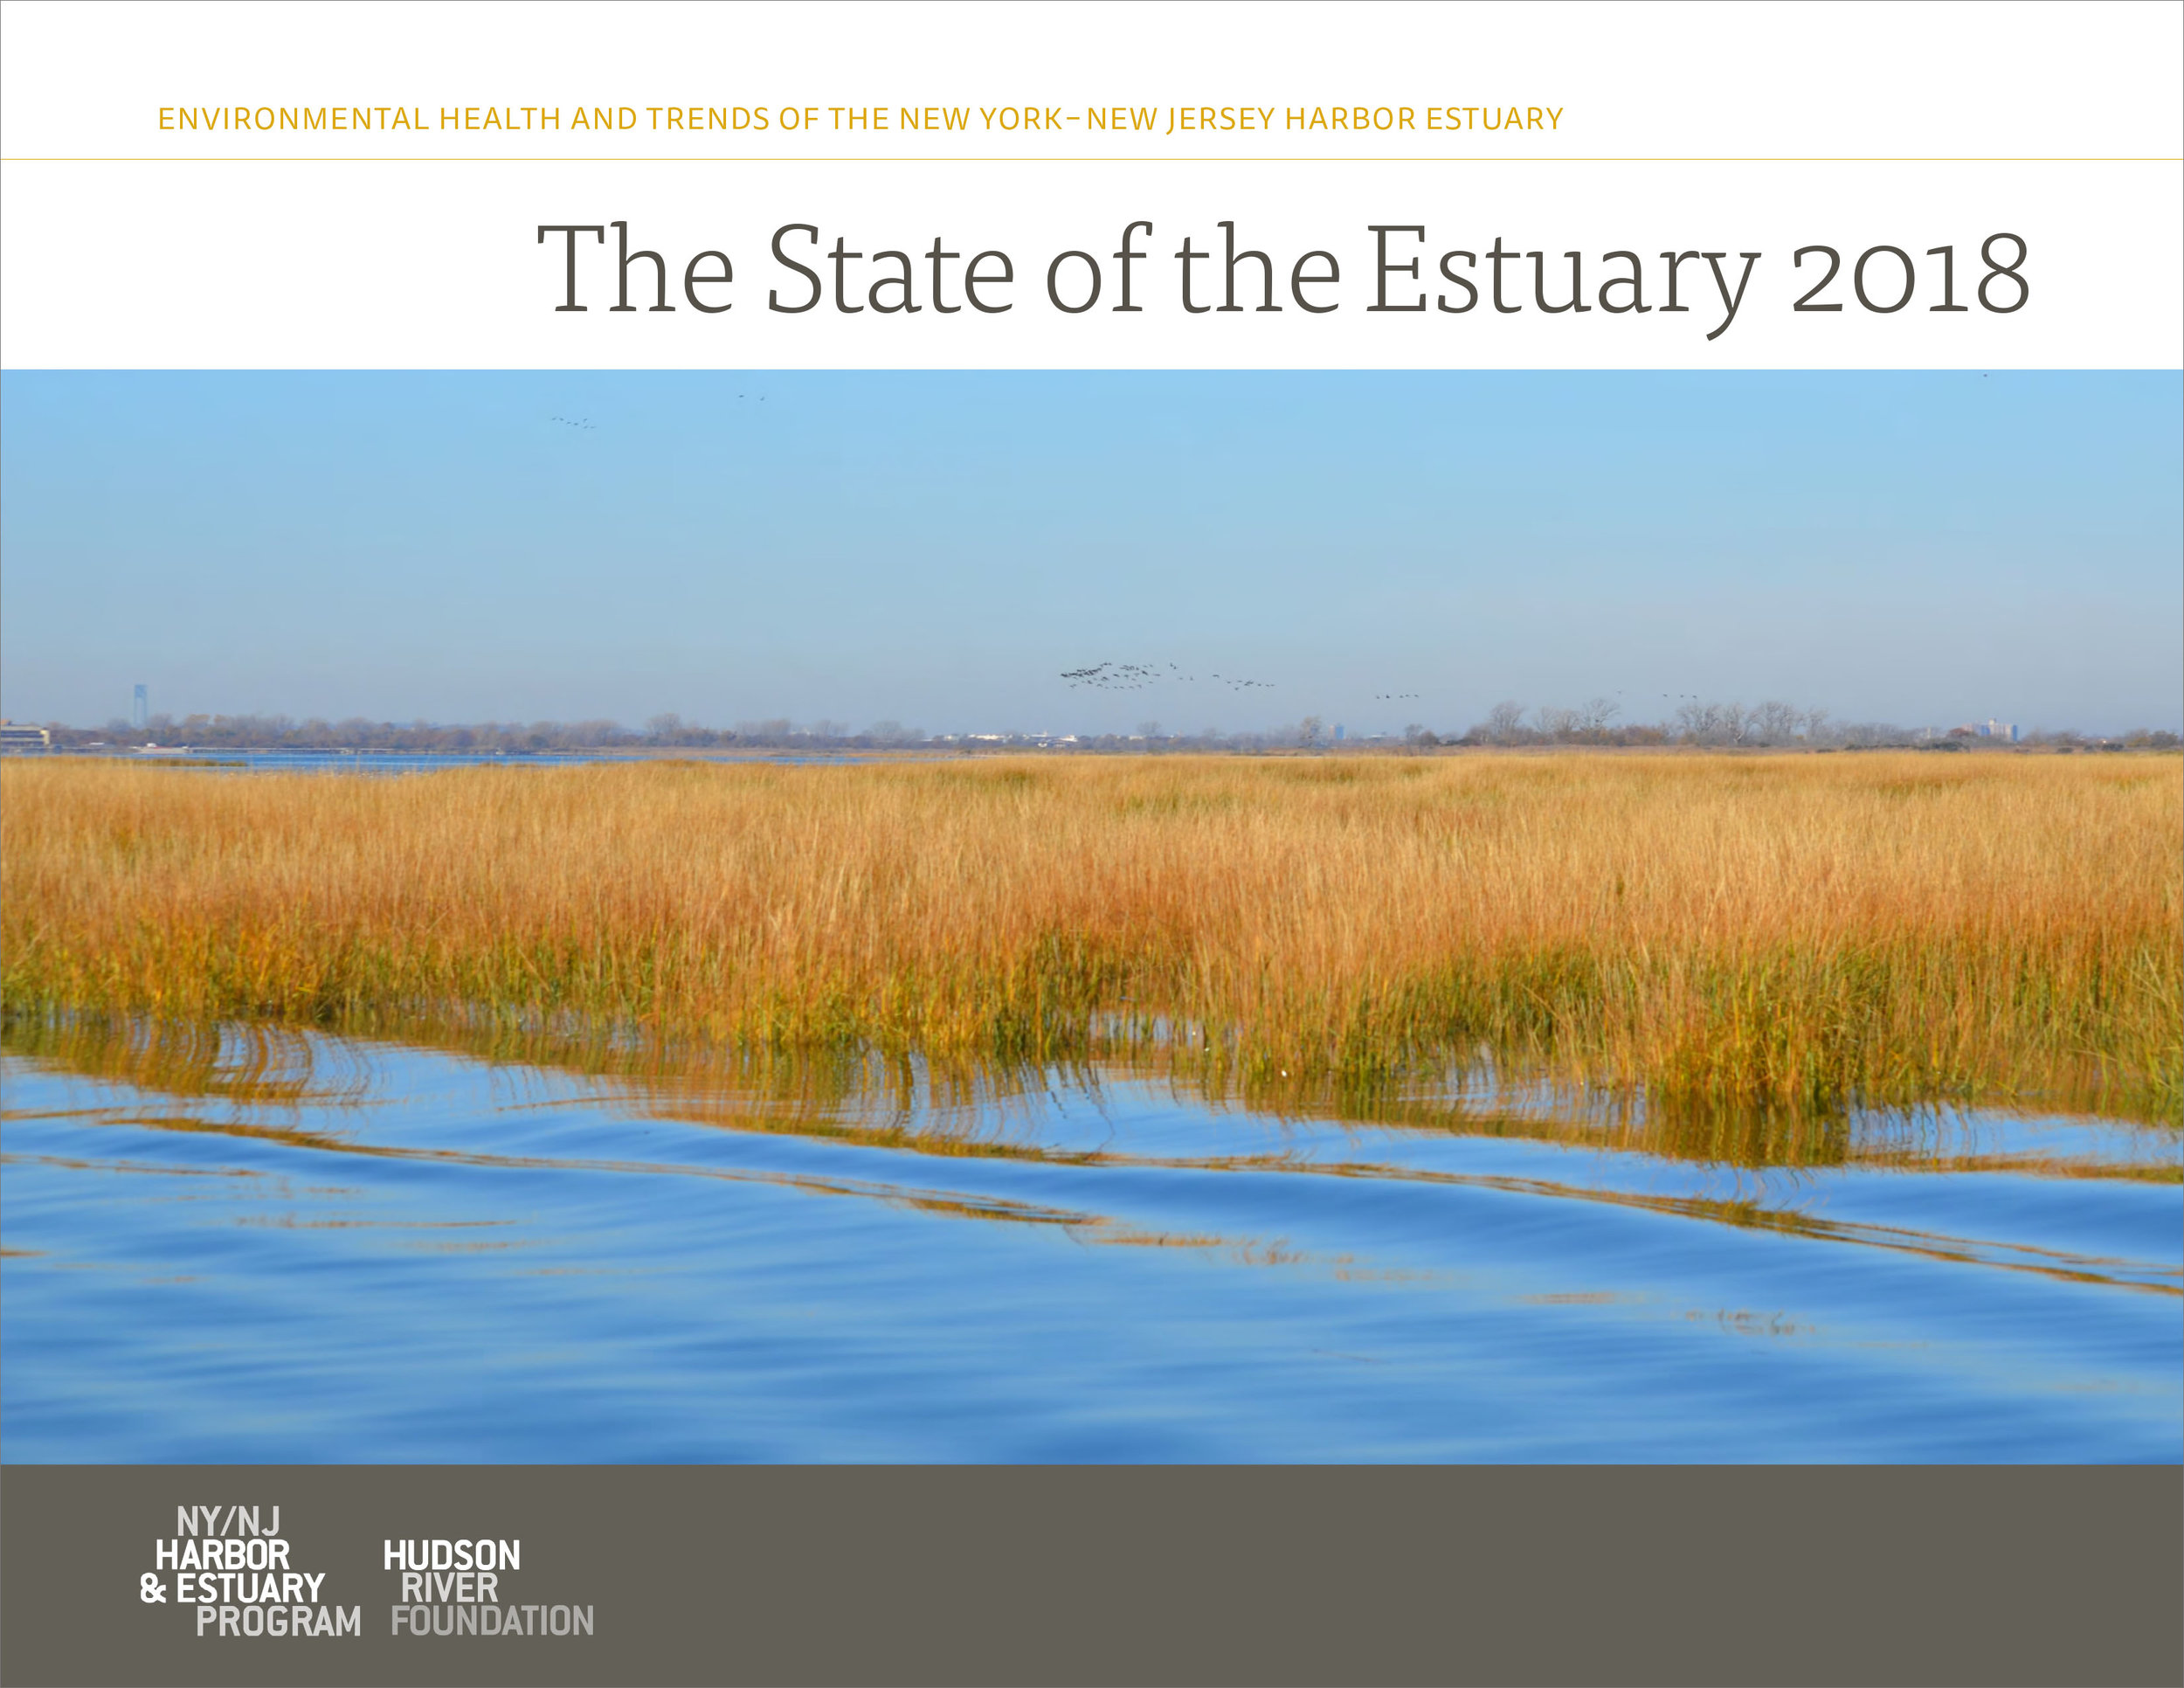 The State of the Estuary 2018